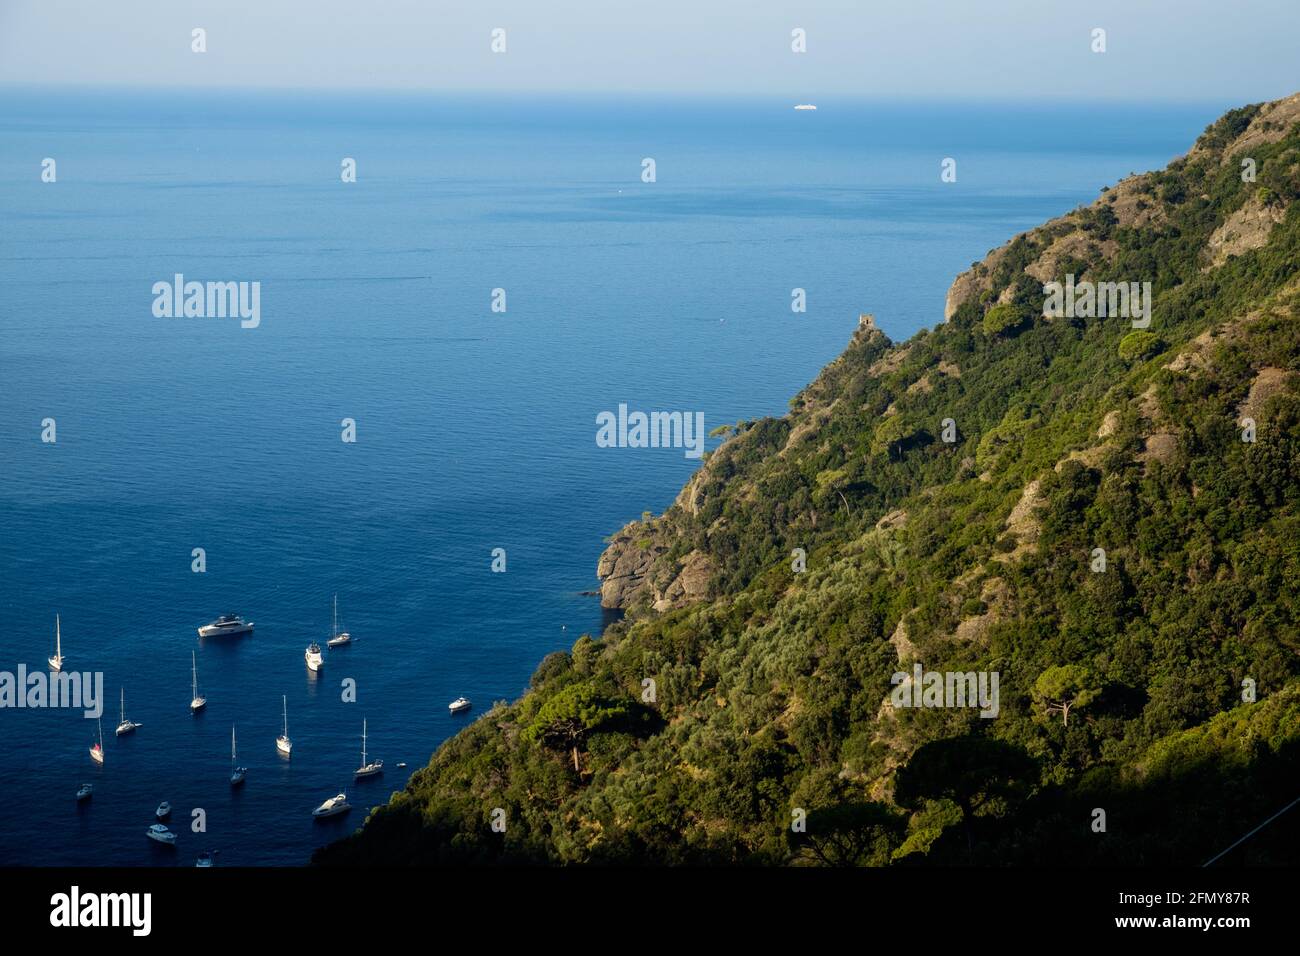 Panoramic view of San Fruttuoso bay, with small boats and clear blue water. Stock Photo